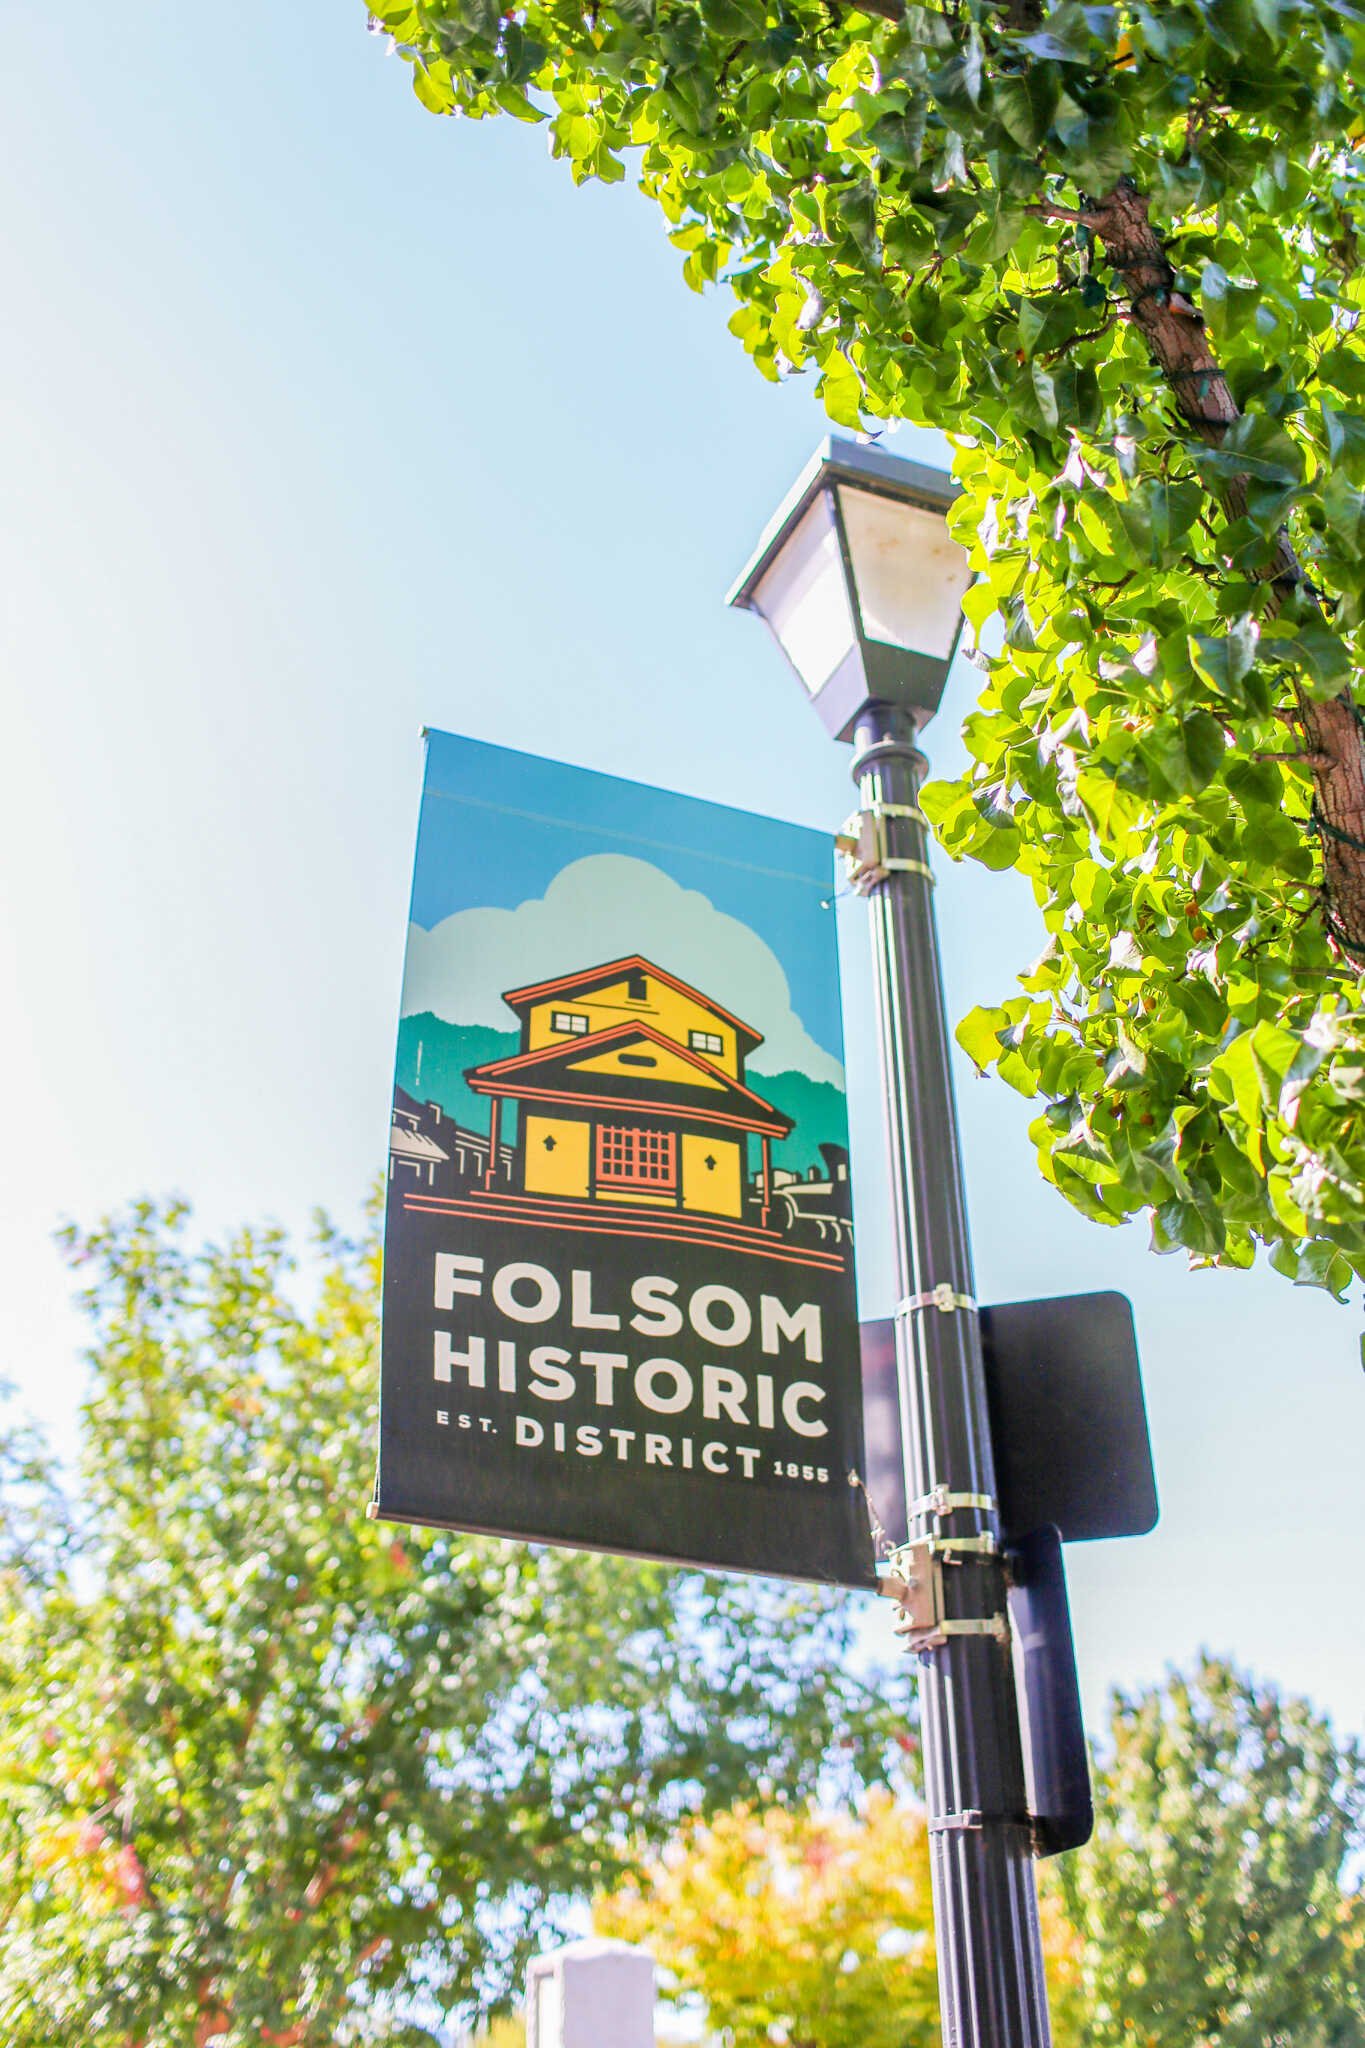 Family Travel Guide to Folsom California - Folsom Historic District on Sutter Street.